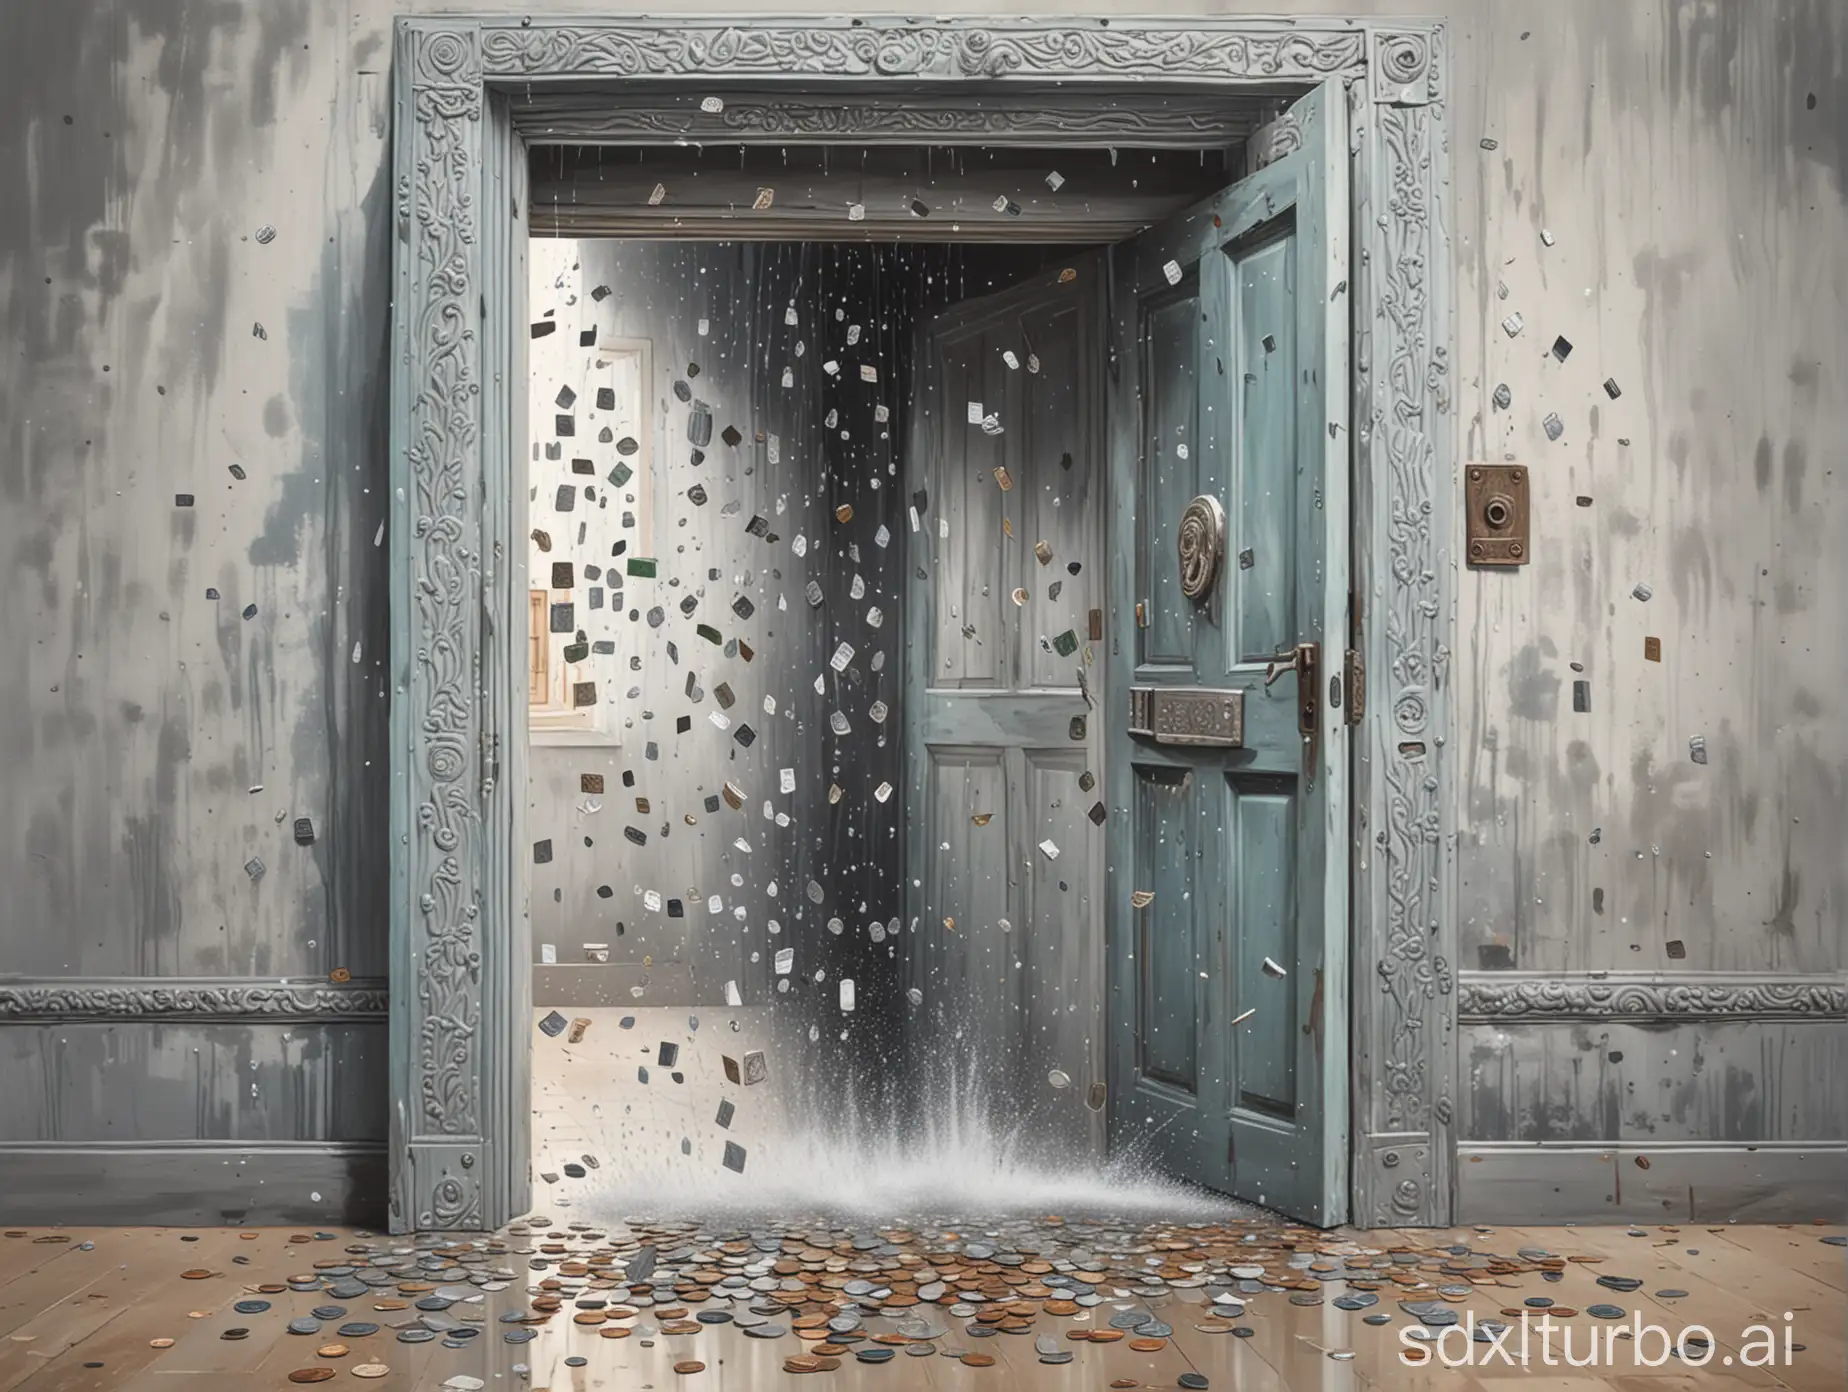 A painting depicting doors open and Indian currency showering (INR) reflecting from the other side. The colour of the door should be silver.